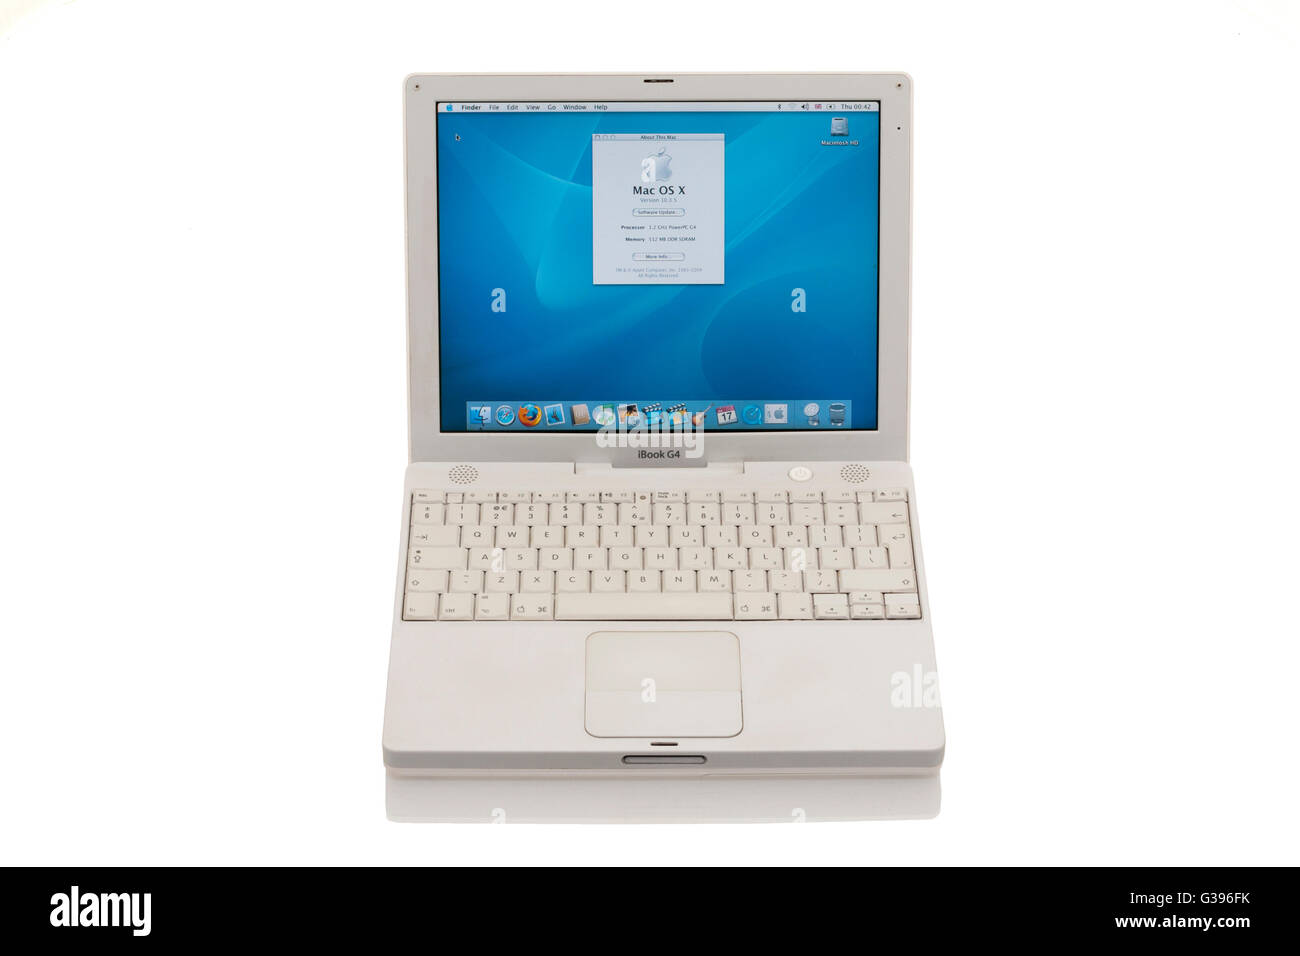 Apple iBook G4 laptop / lap top computer with scrolling TrackPad / trackpad / track pad, ' about this Mac ' screen & keyboard. Stock Photo